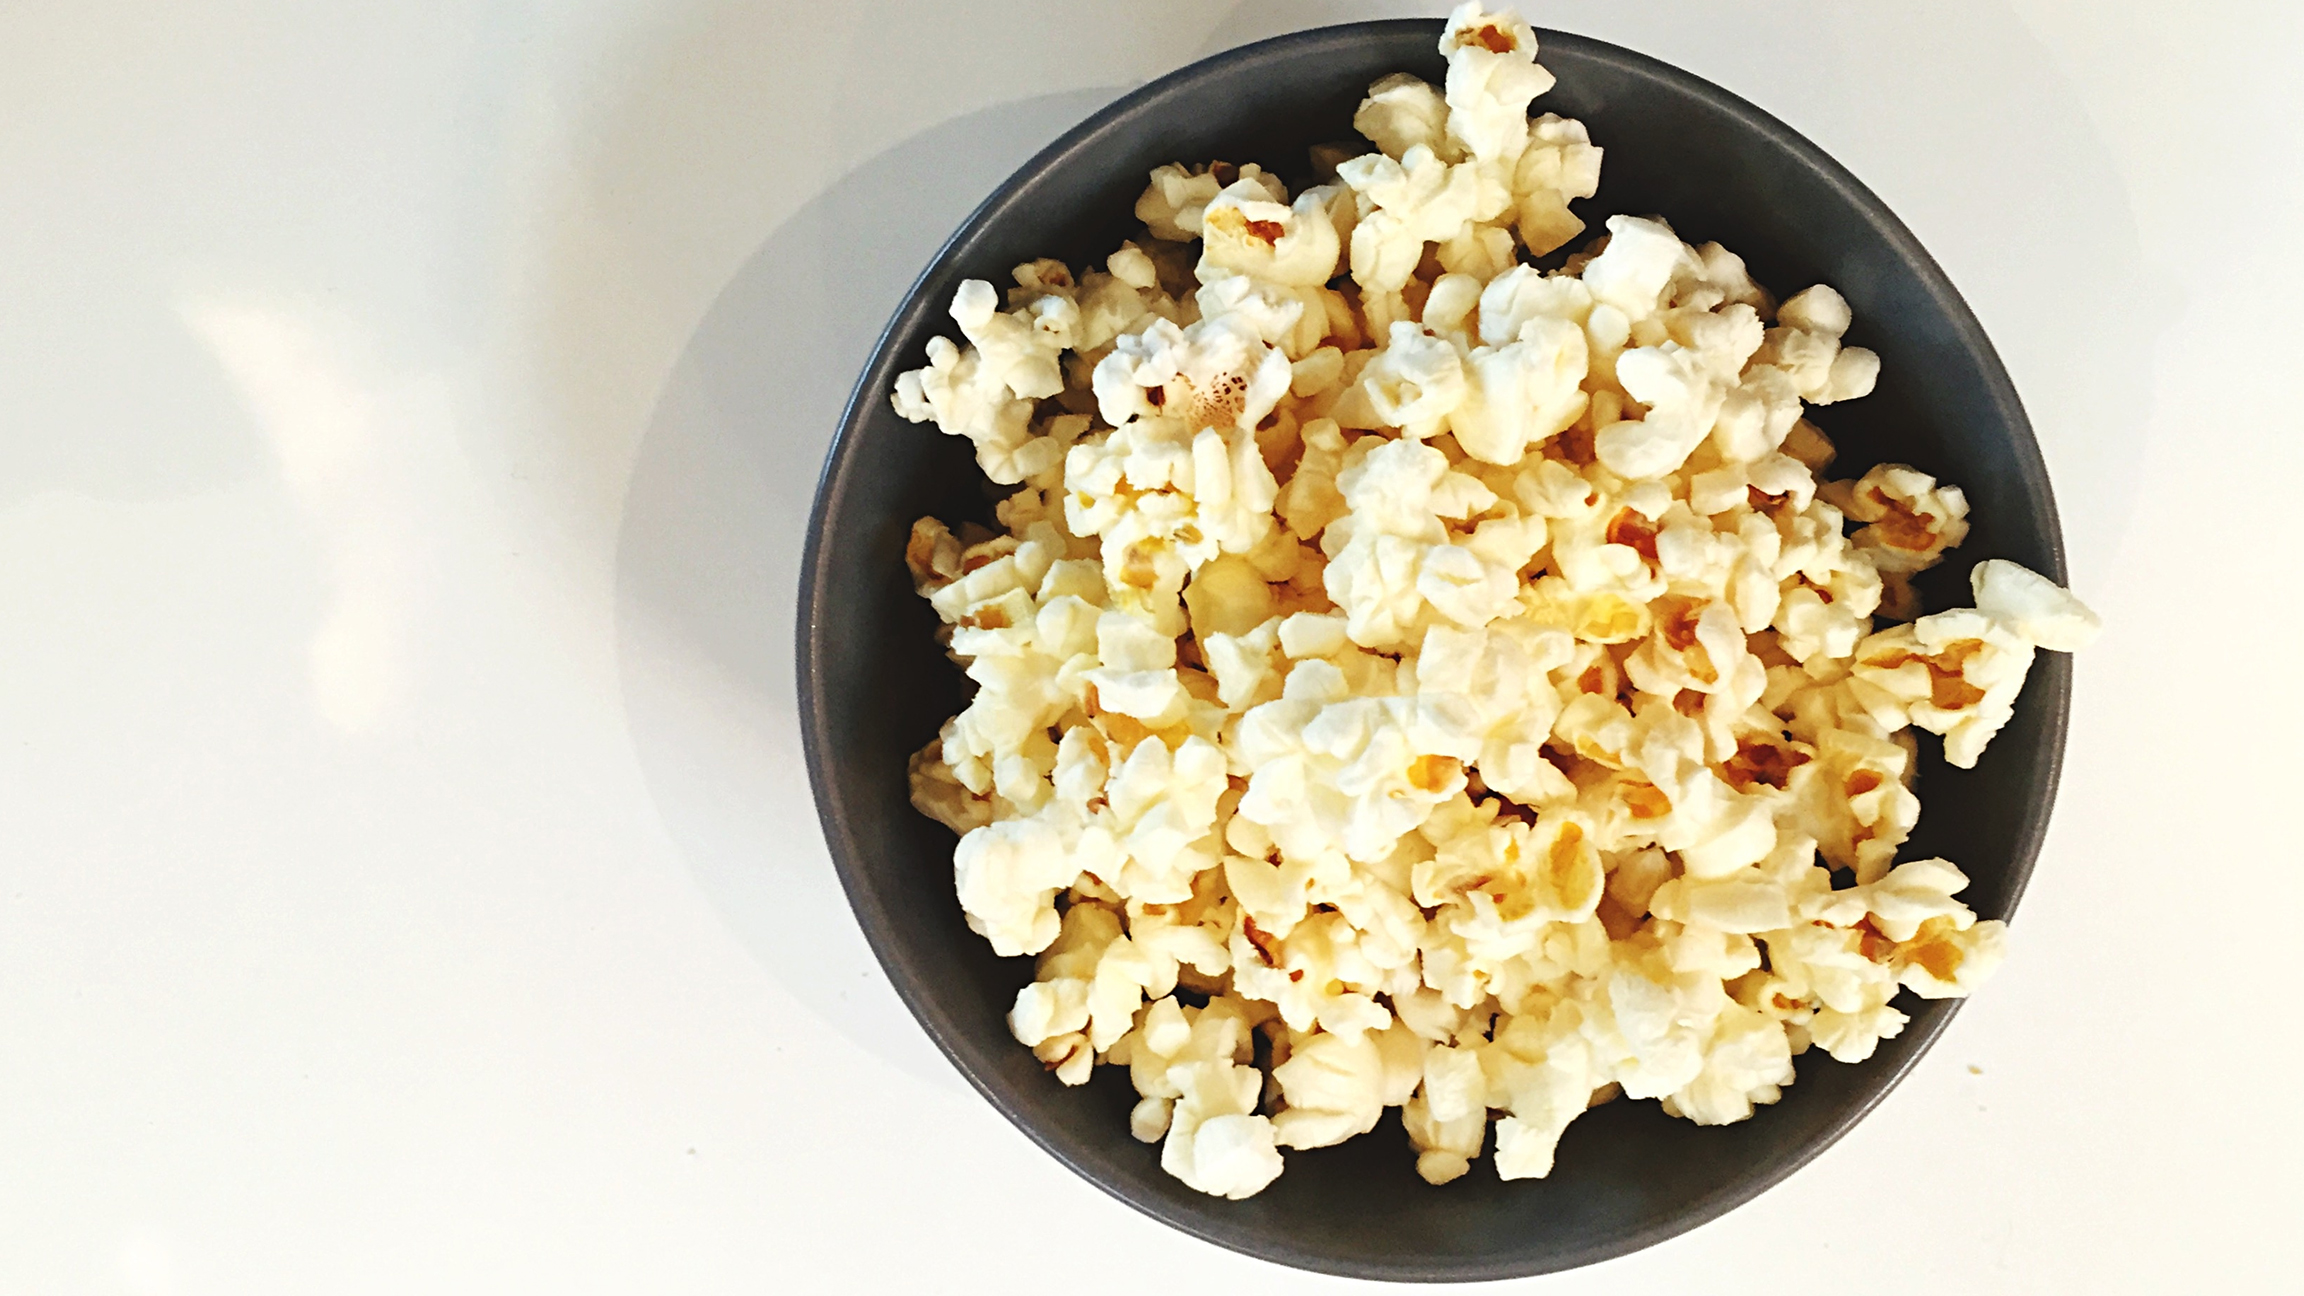 Watch: This TikTok Video Shows How to Evenly Butter Movie Popcorn